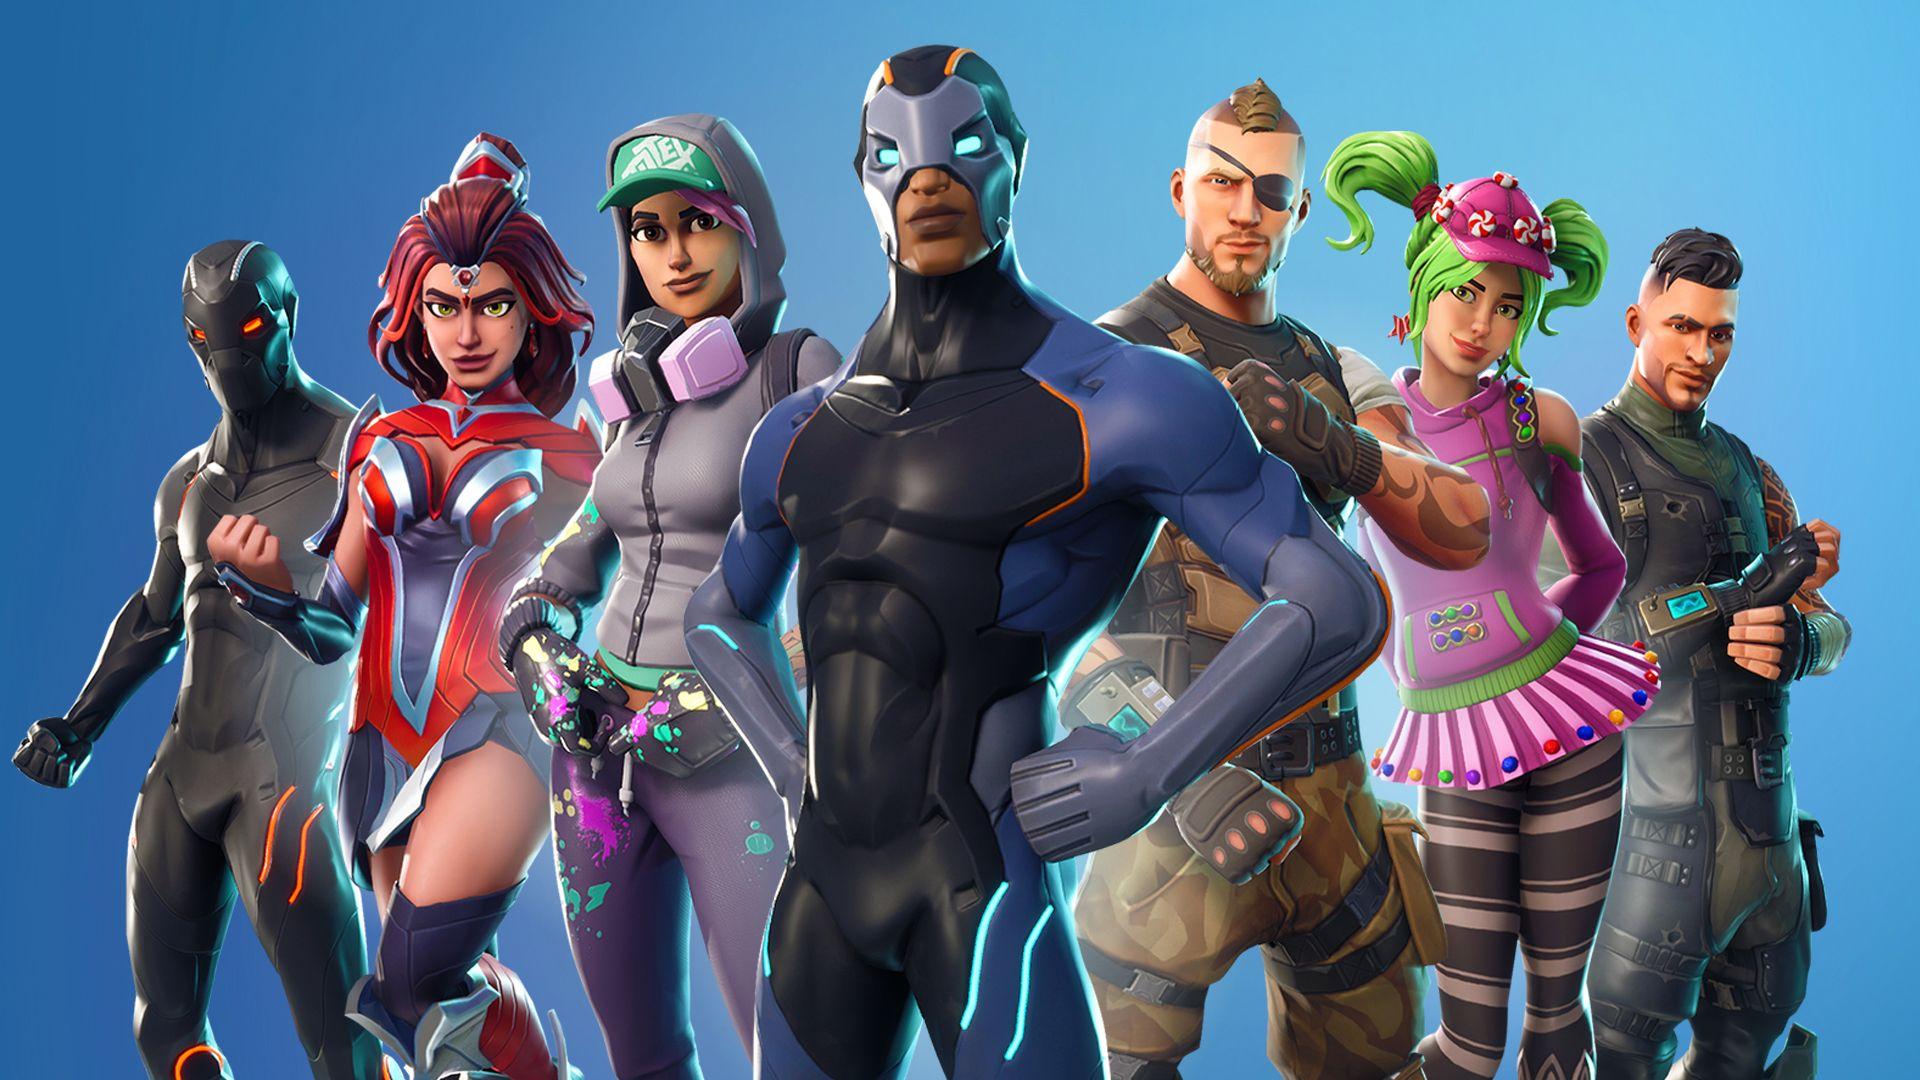 Can't see your Zoey outfit on Fortnite? Epic disabled it temporarily